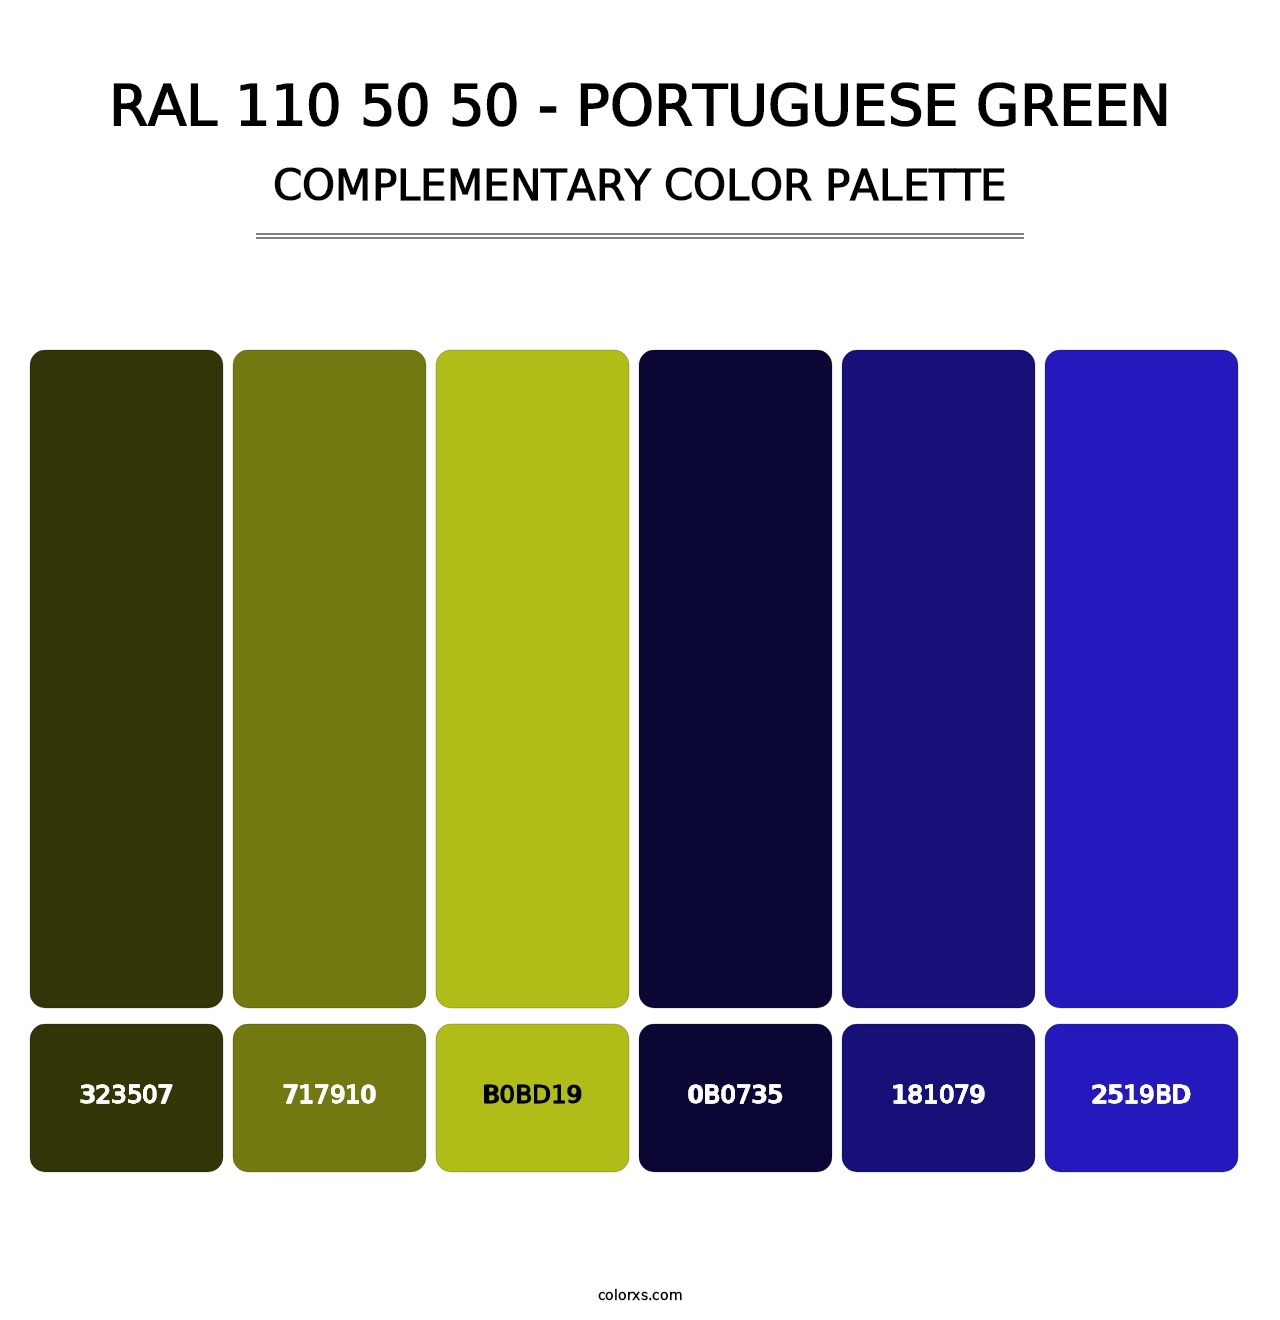 RAL 110 50 50 - Portuguese Green - Complementary Color Palette